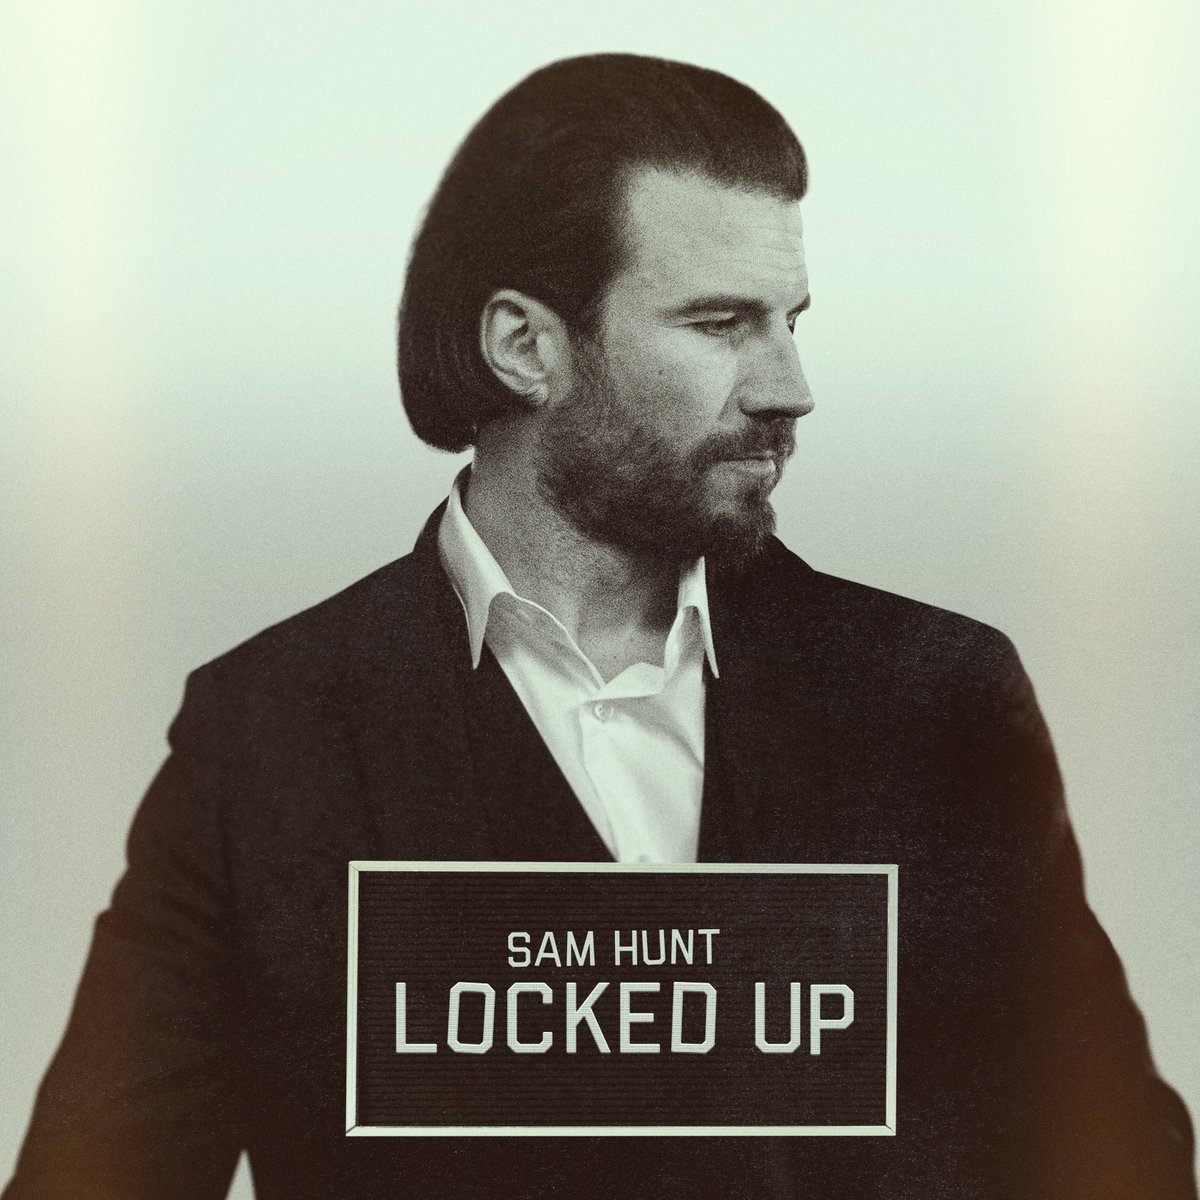 My new EP, Locked Up, is out April 5th. Listen to the title track, watch the video, and pre-order now. strm.to/SamHuntLockedUp